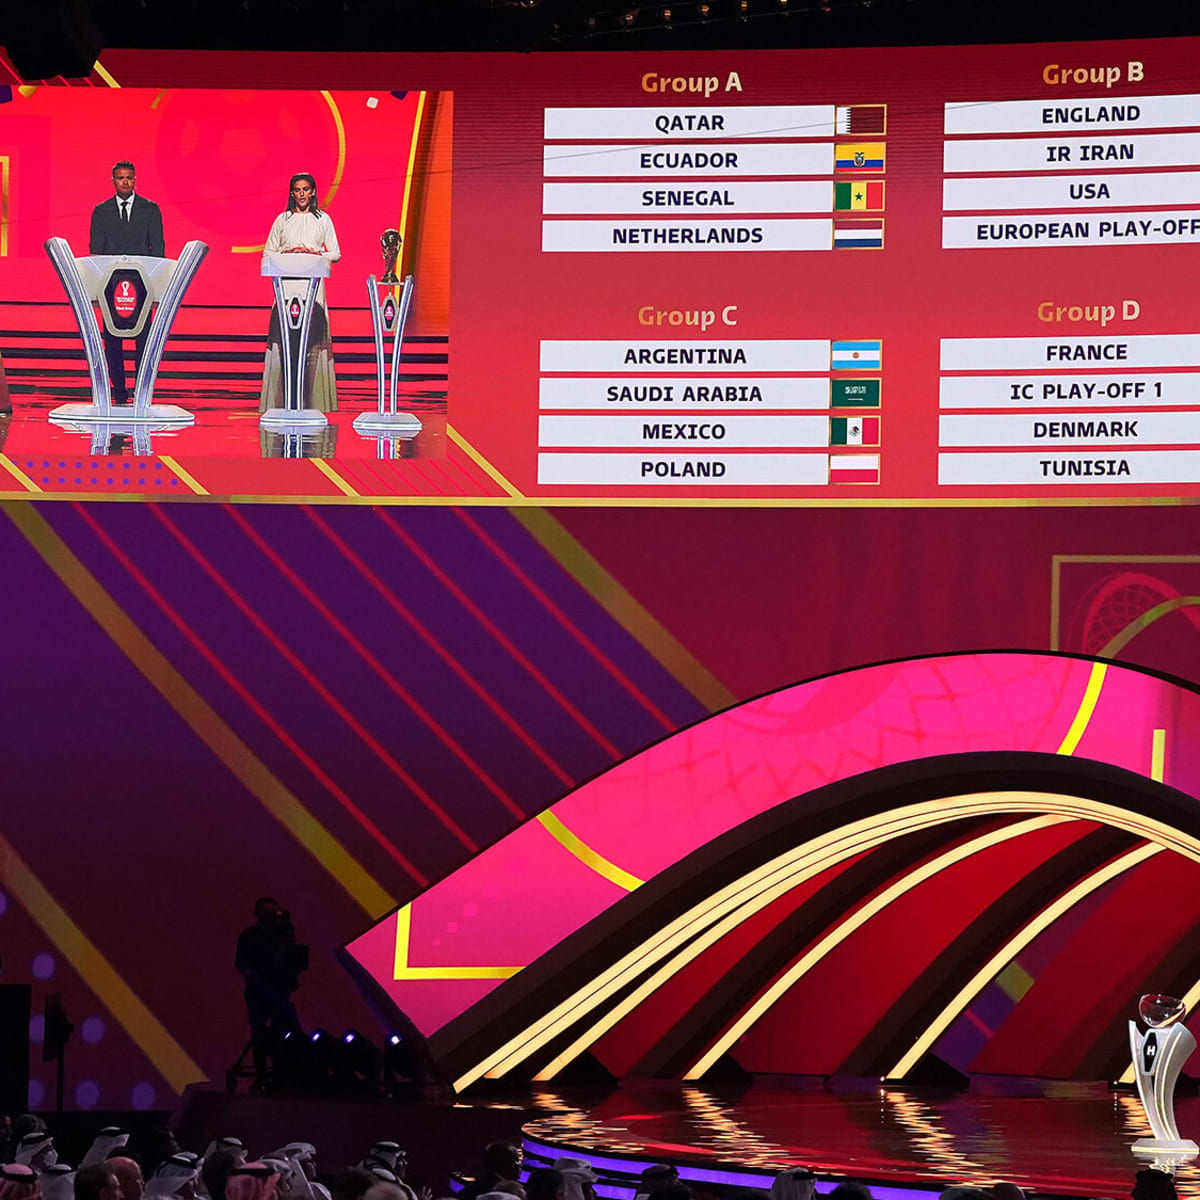 World Cup Draw 2022: What Can We Learn From It?